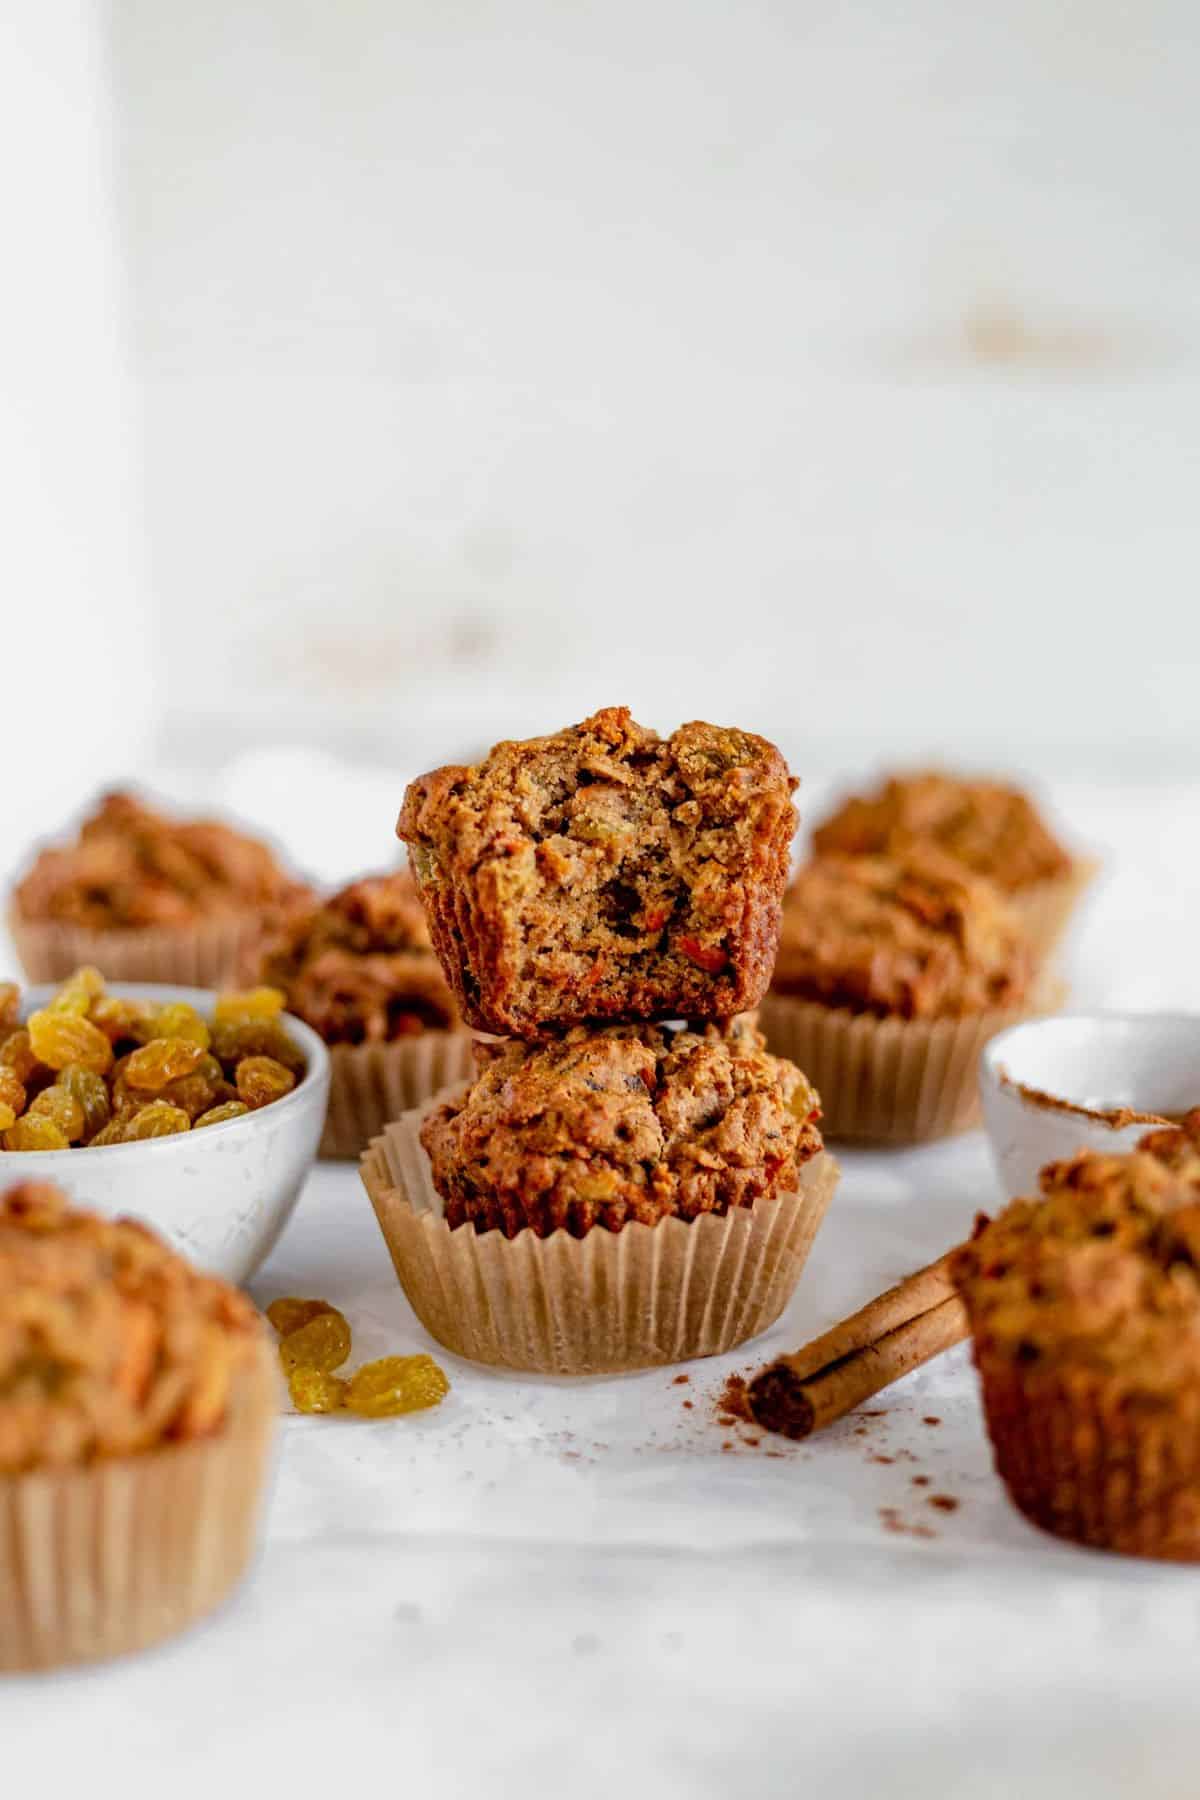 Delicious Gluten-Free Morning Glory Muffins on a table.